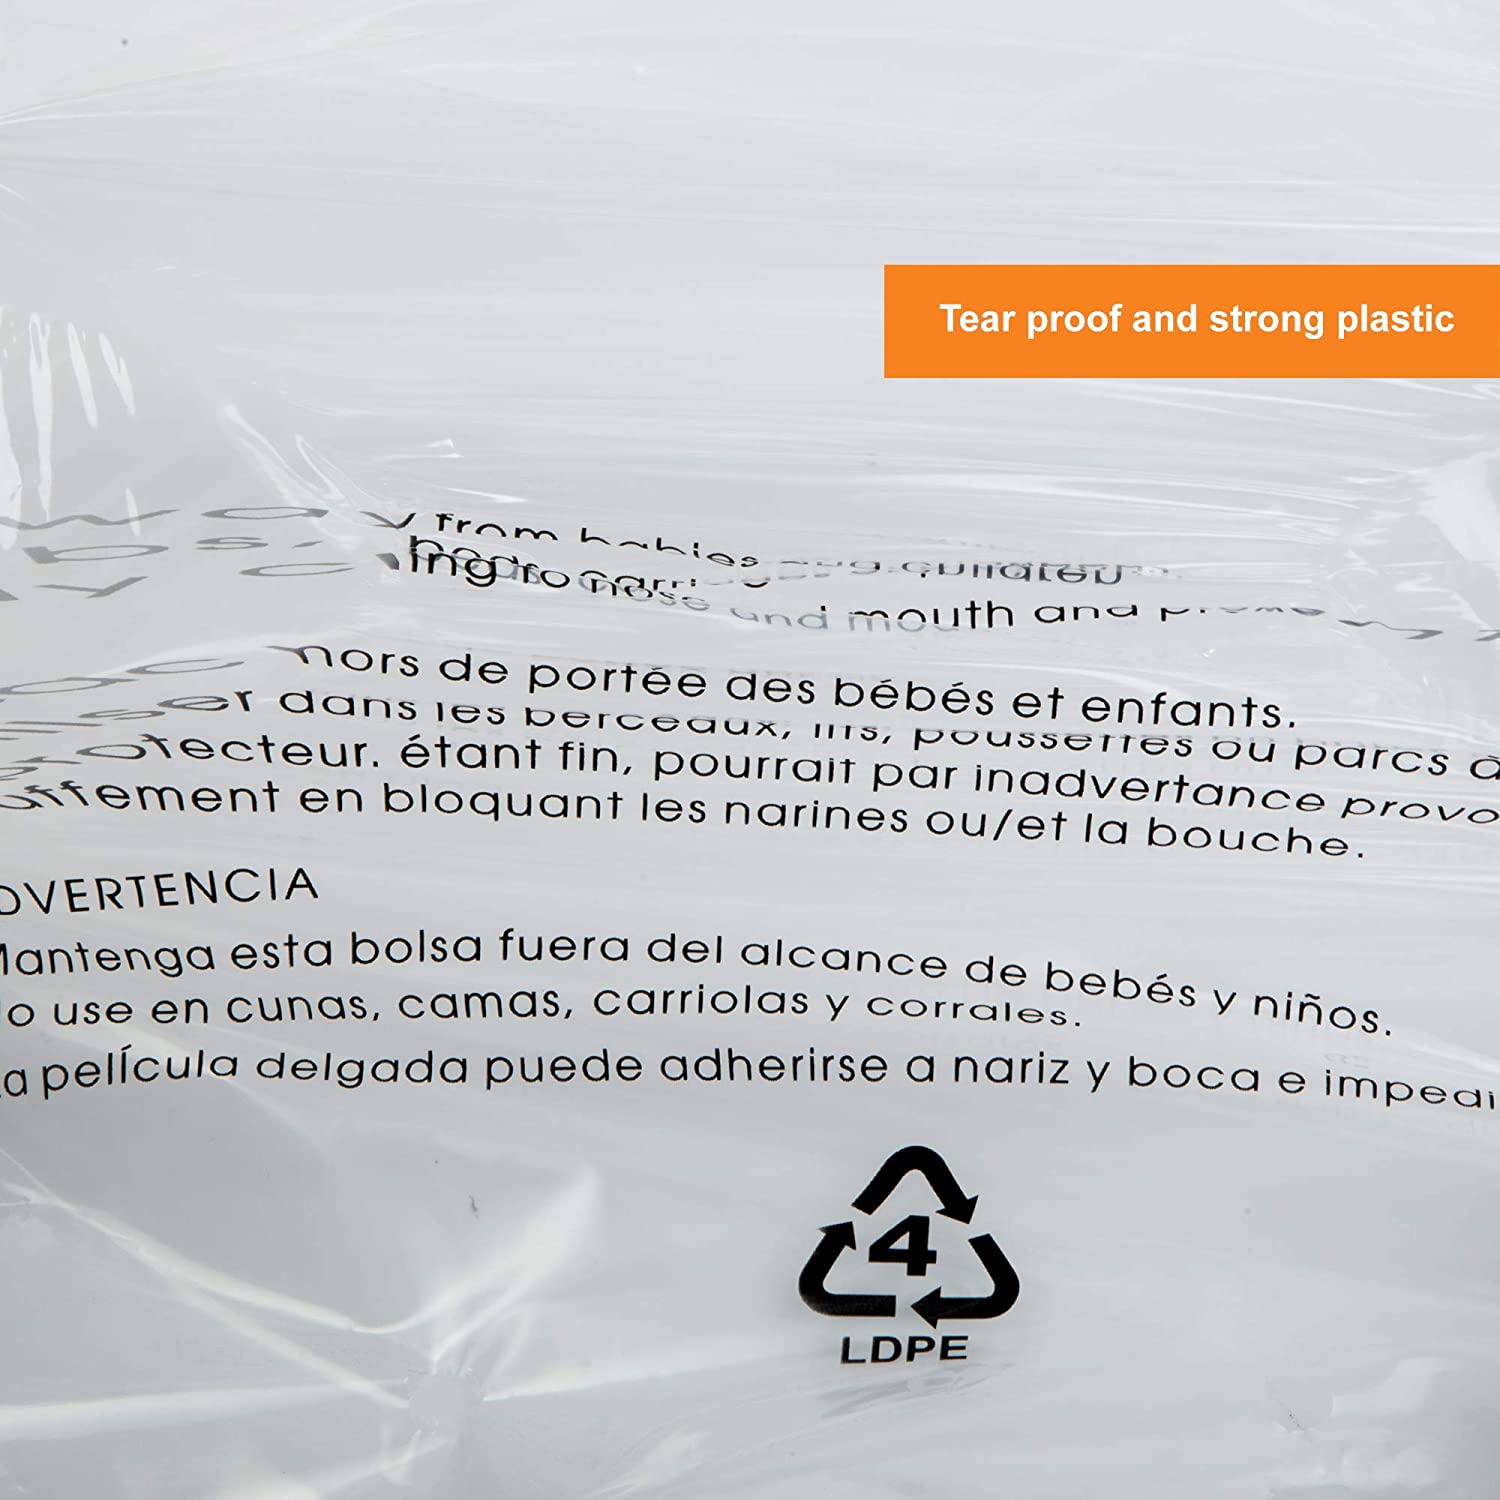 industrial clear bag with tear proof and strong plastic material